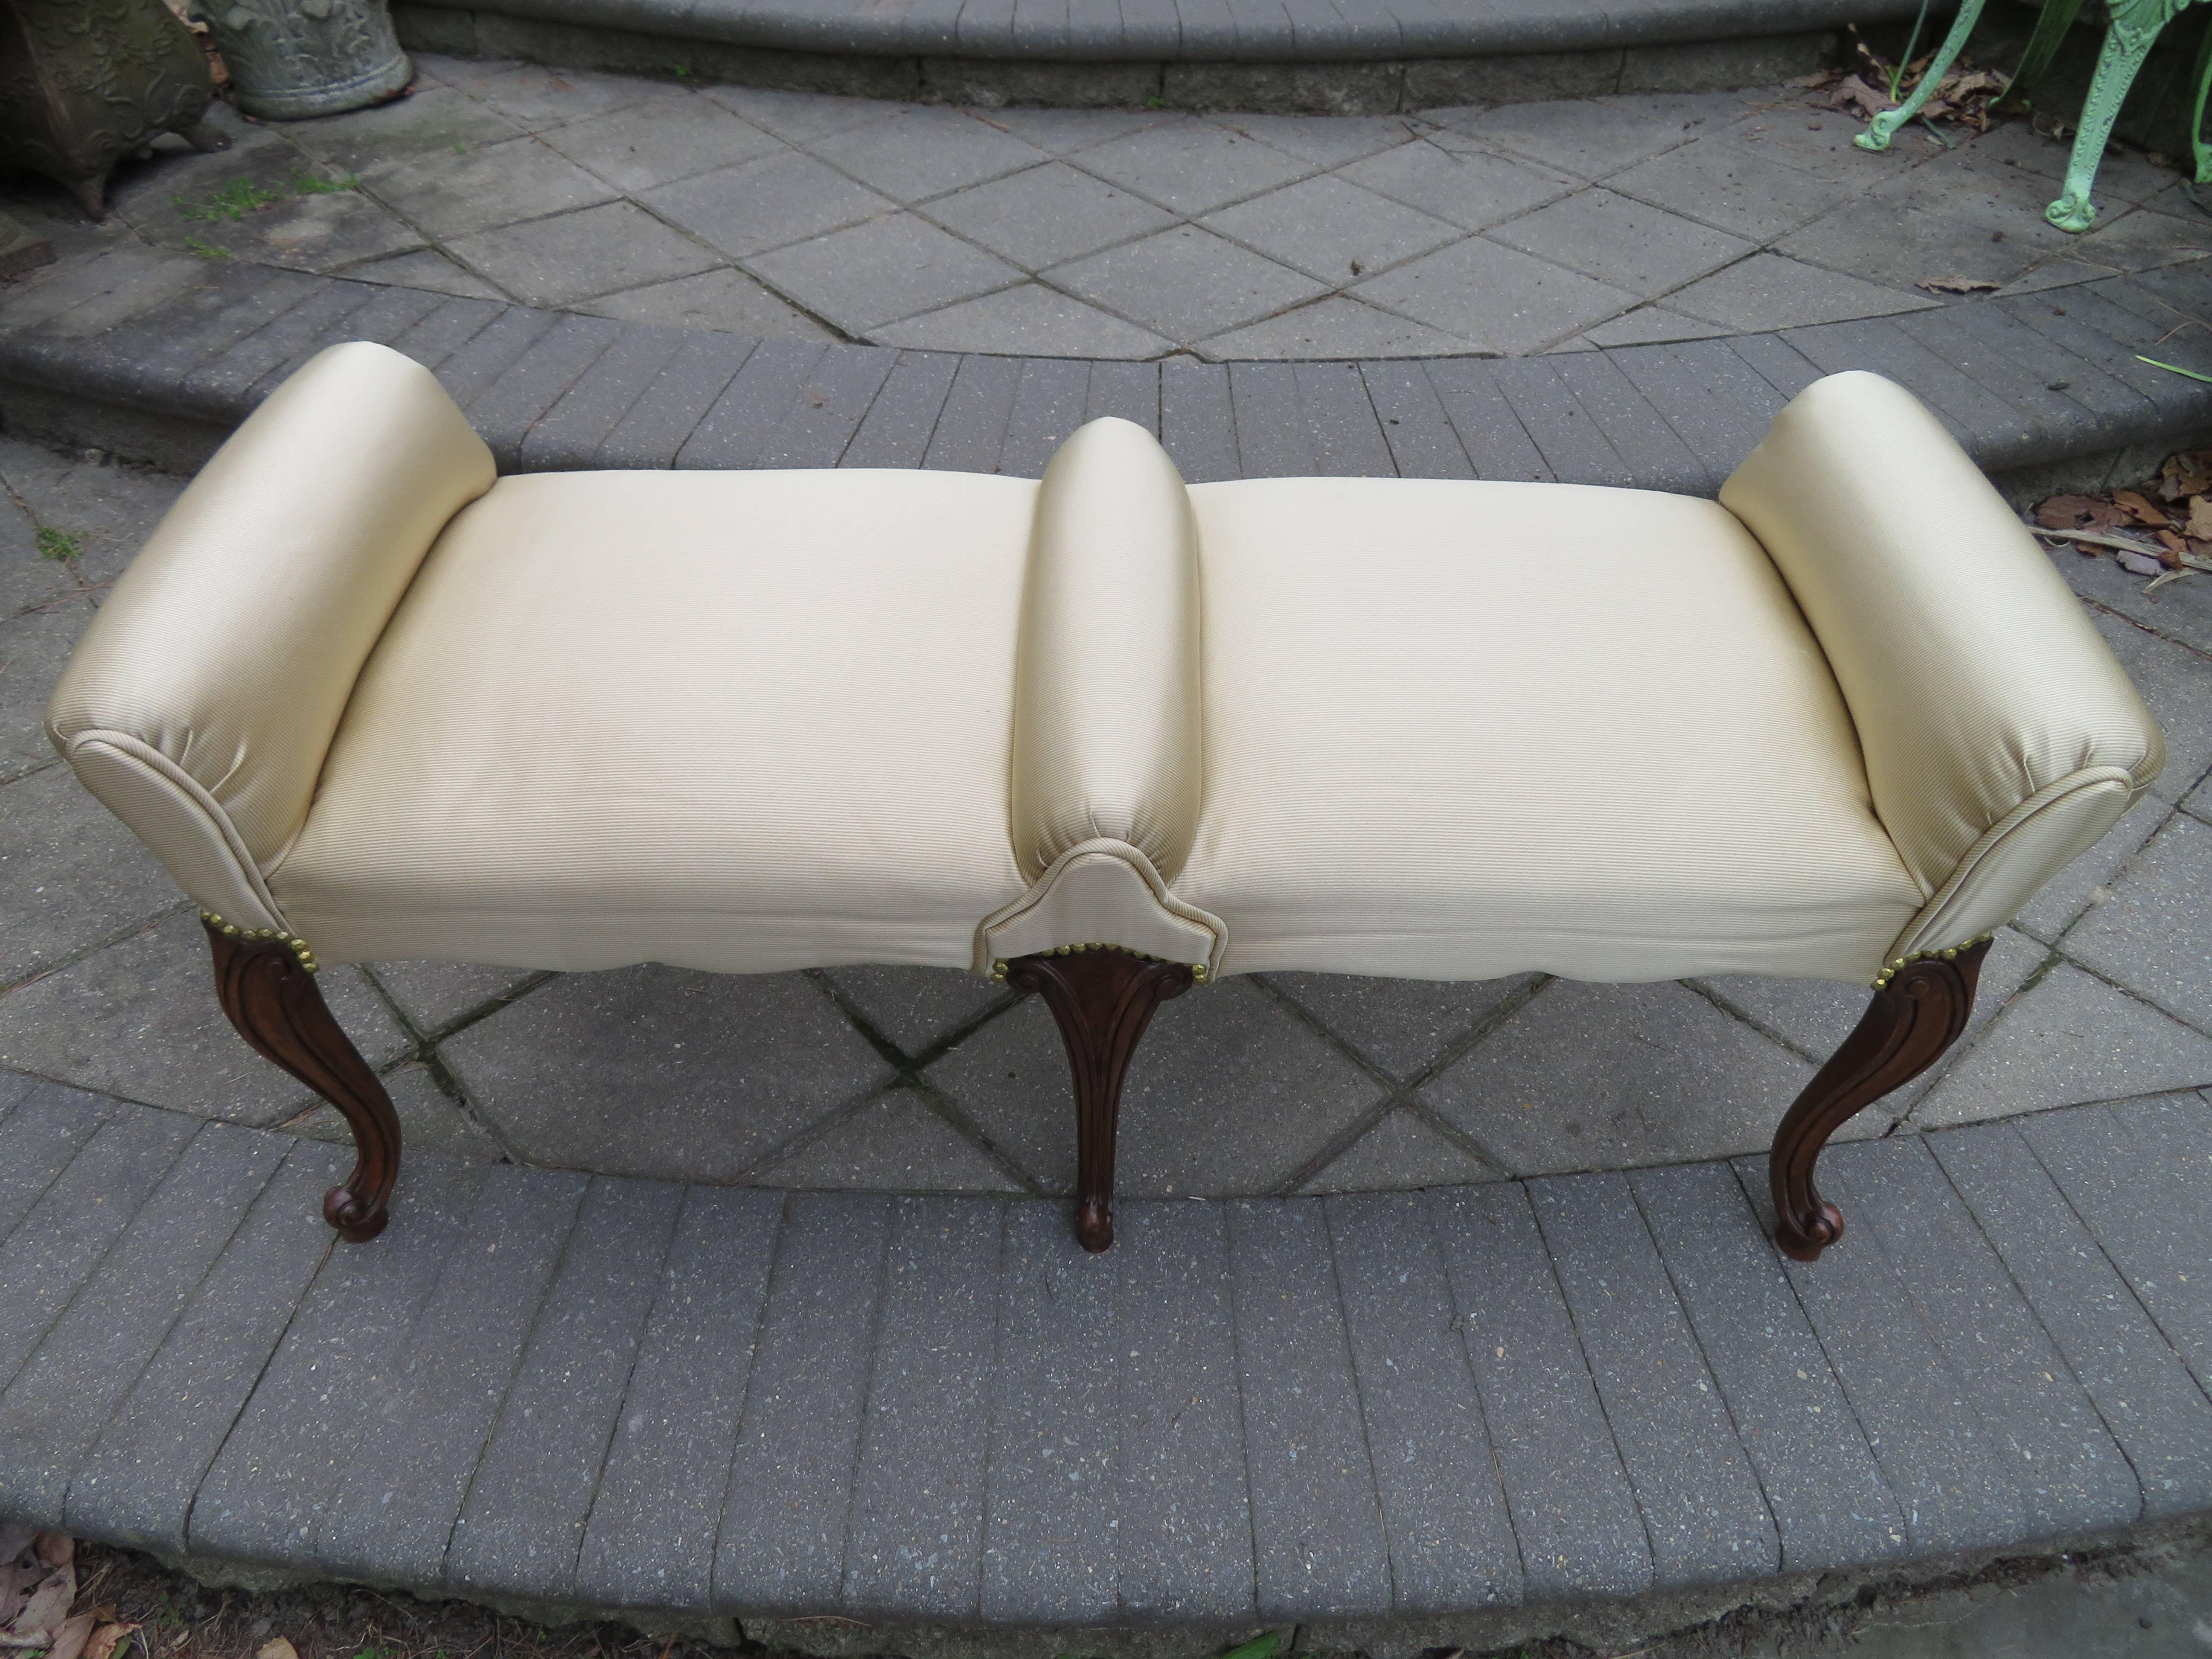 Elegant Regency modern cabriolet leg upholstered bench. Magnificent in person with well sculpted cabriolet walnut legs and scrumptious upholstered double divided seat-very unusual.